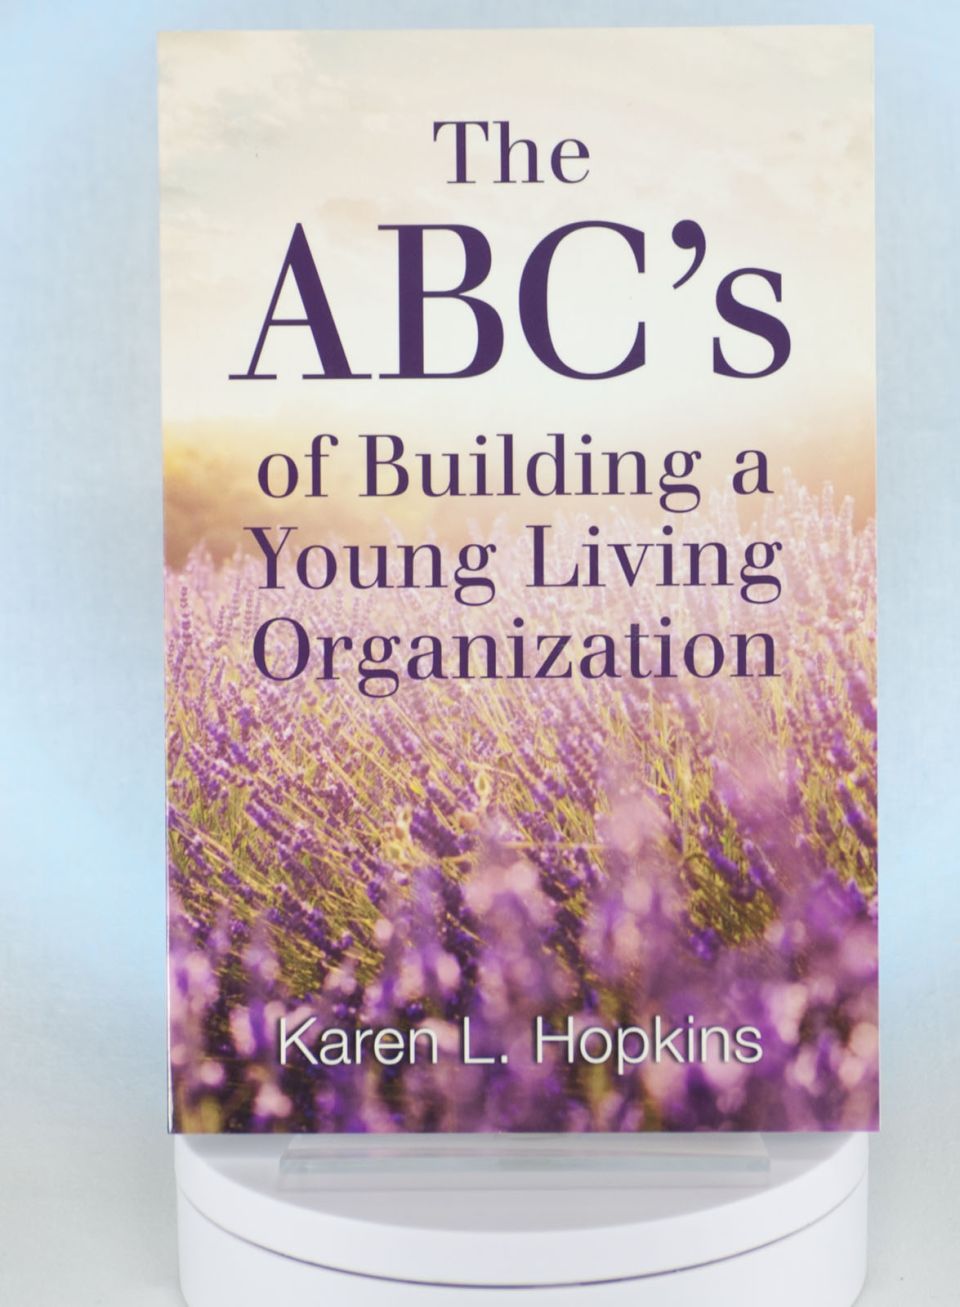 The ABC's of Building a Young Living Organization by Karen L. Hopkins